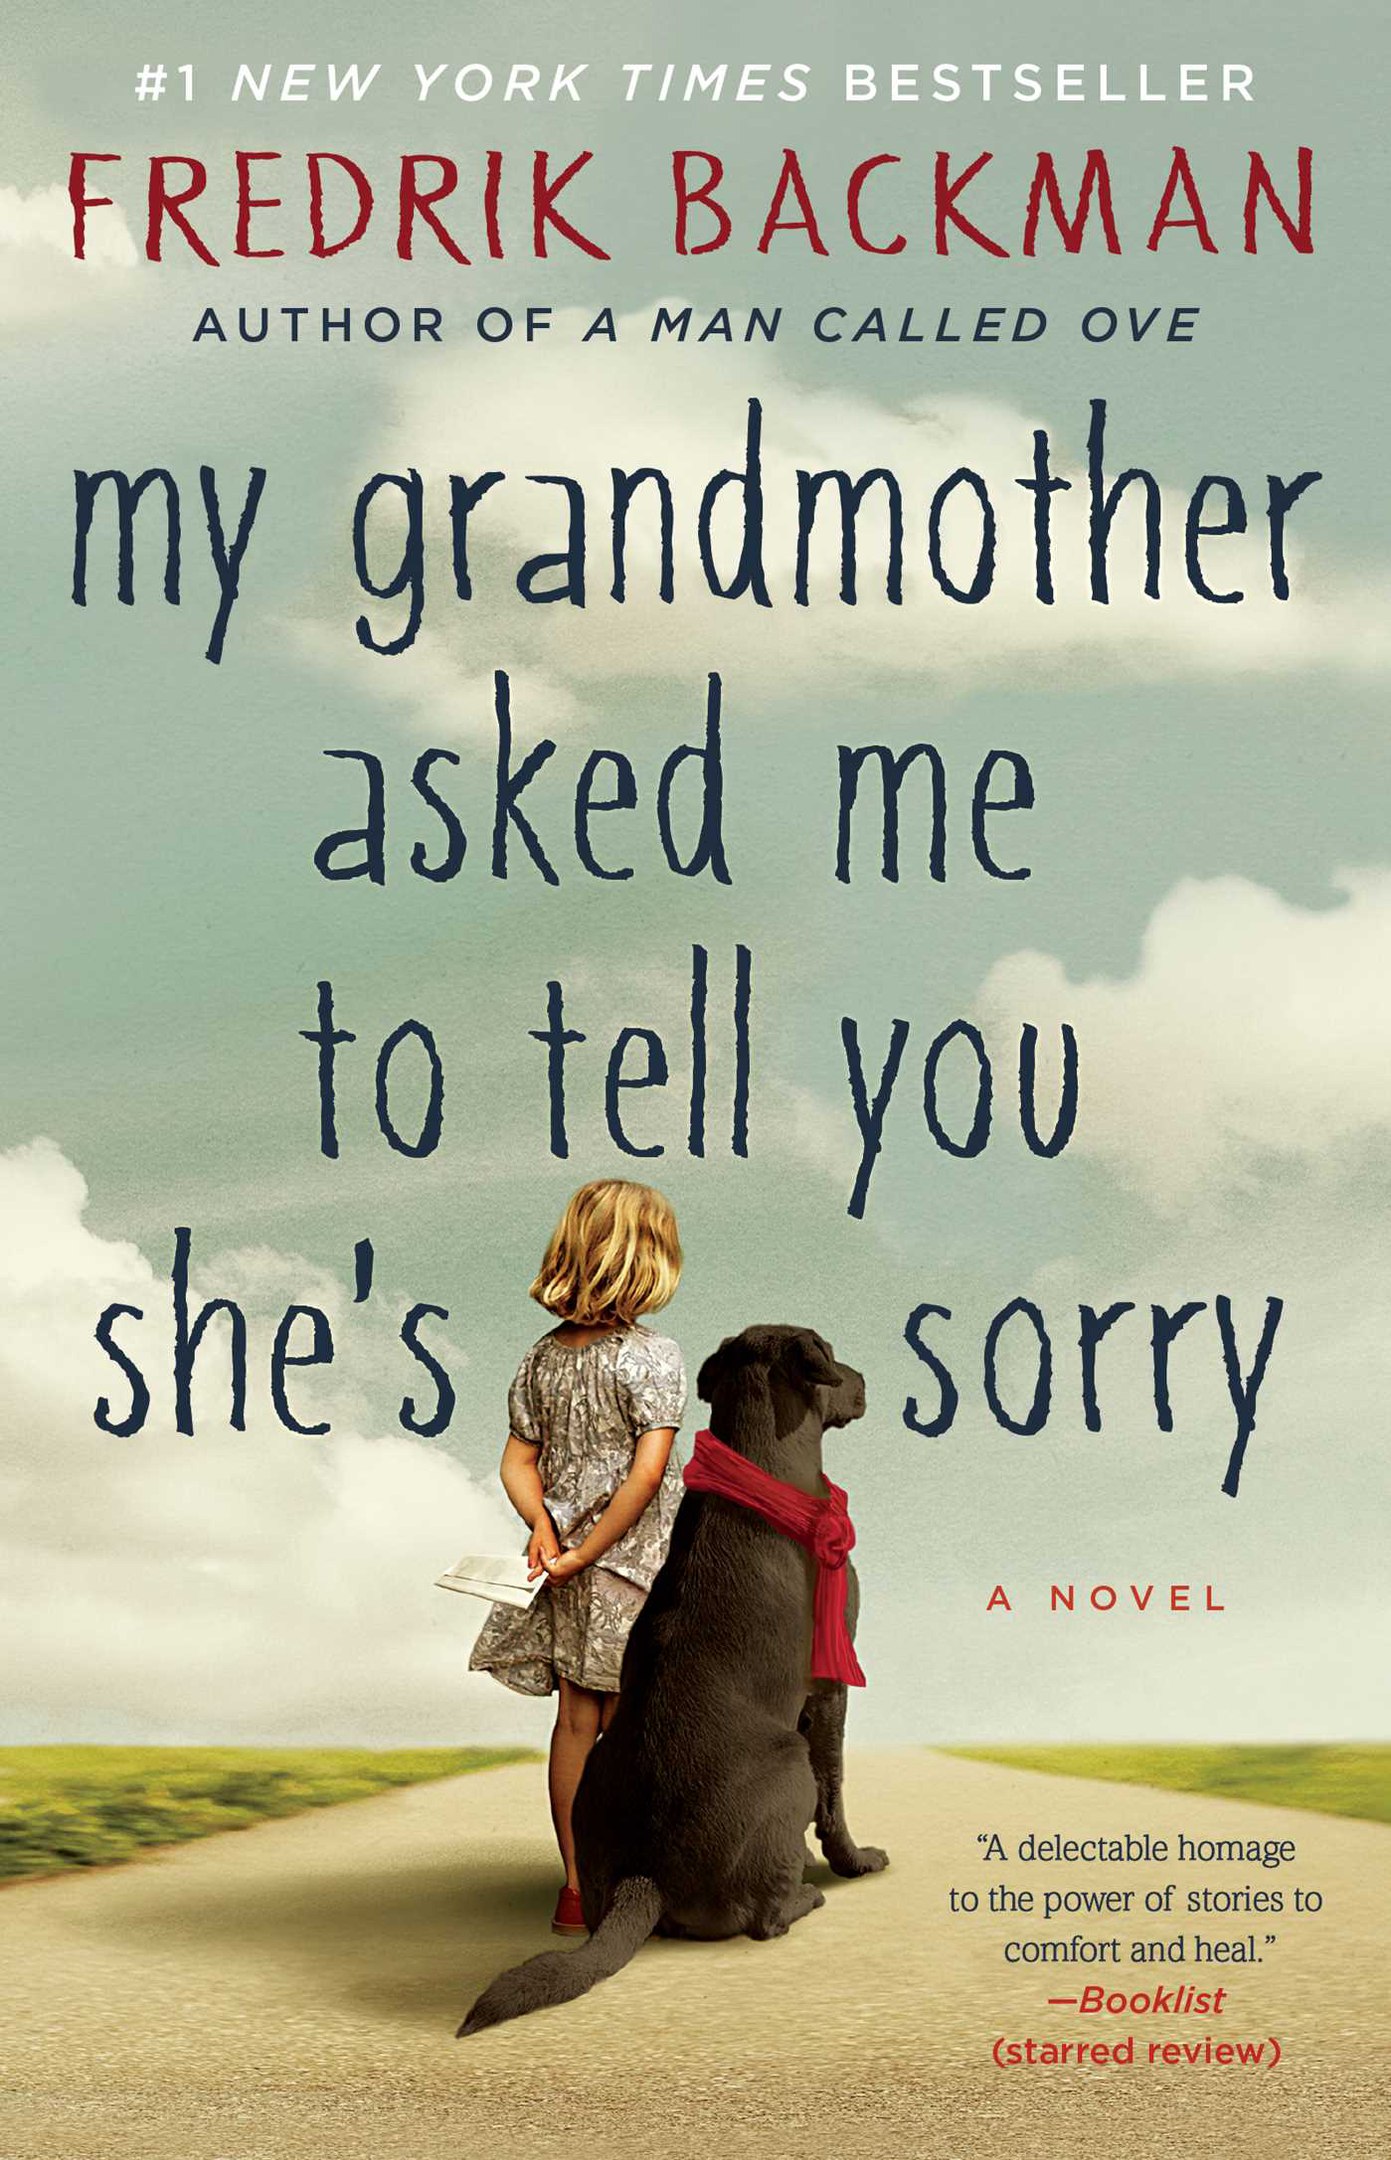 Fredrik Backman – My Grandmother Asked Me To Tell You She’s Sorry